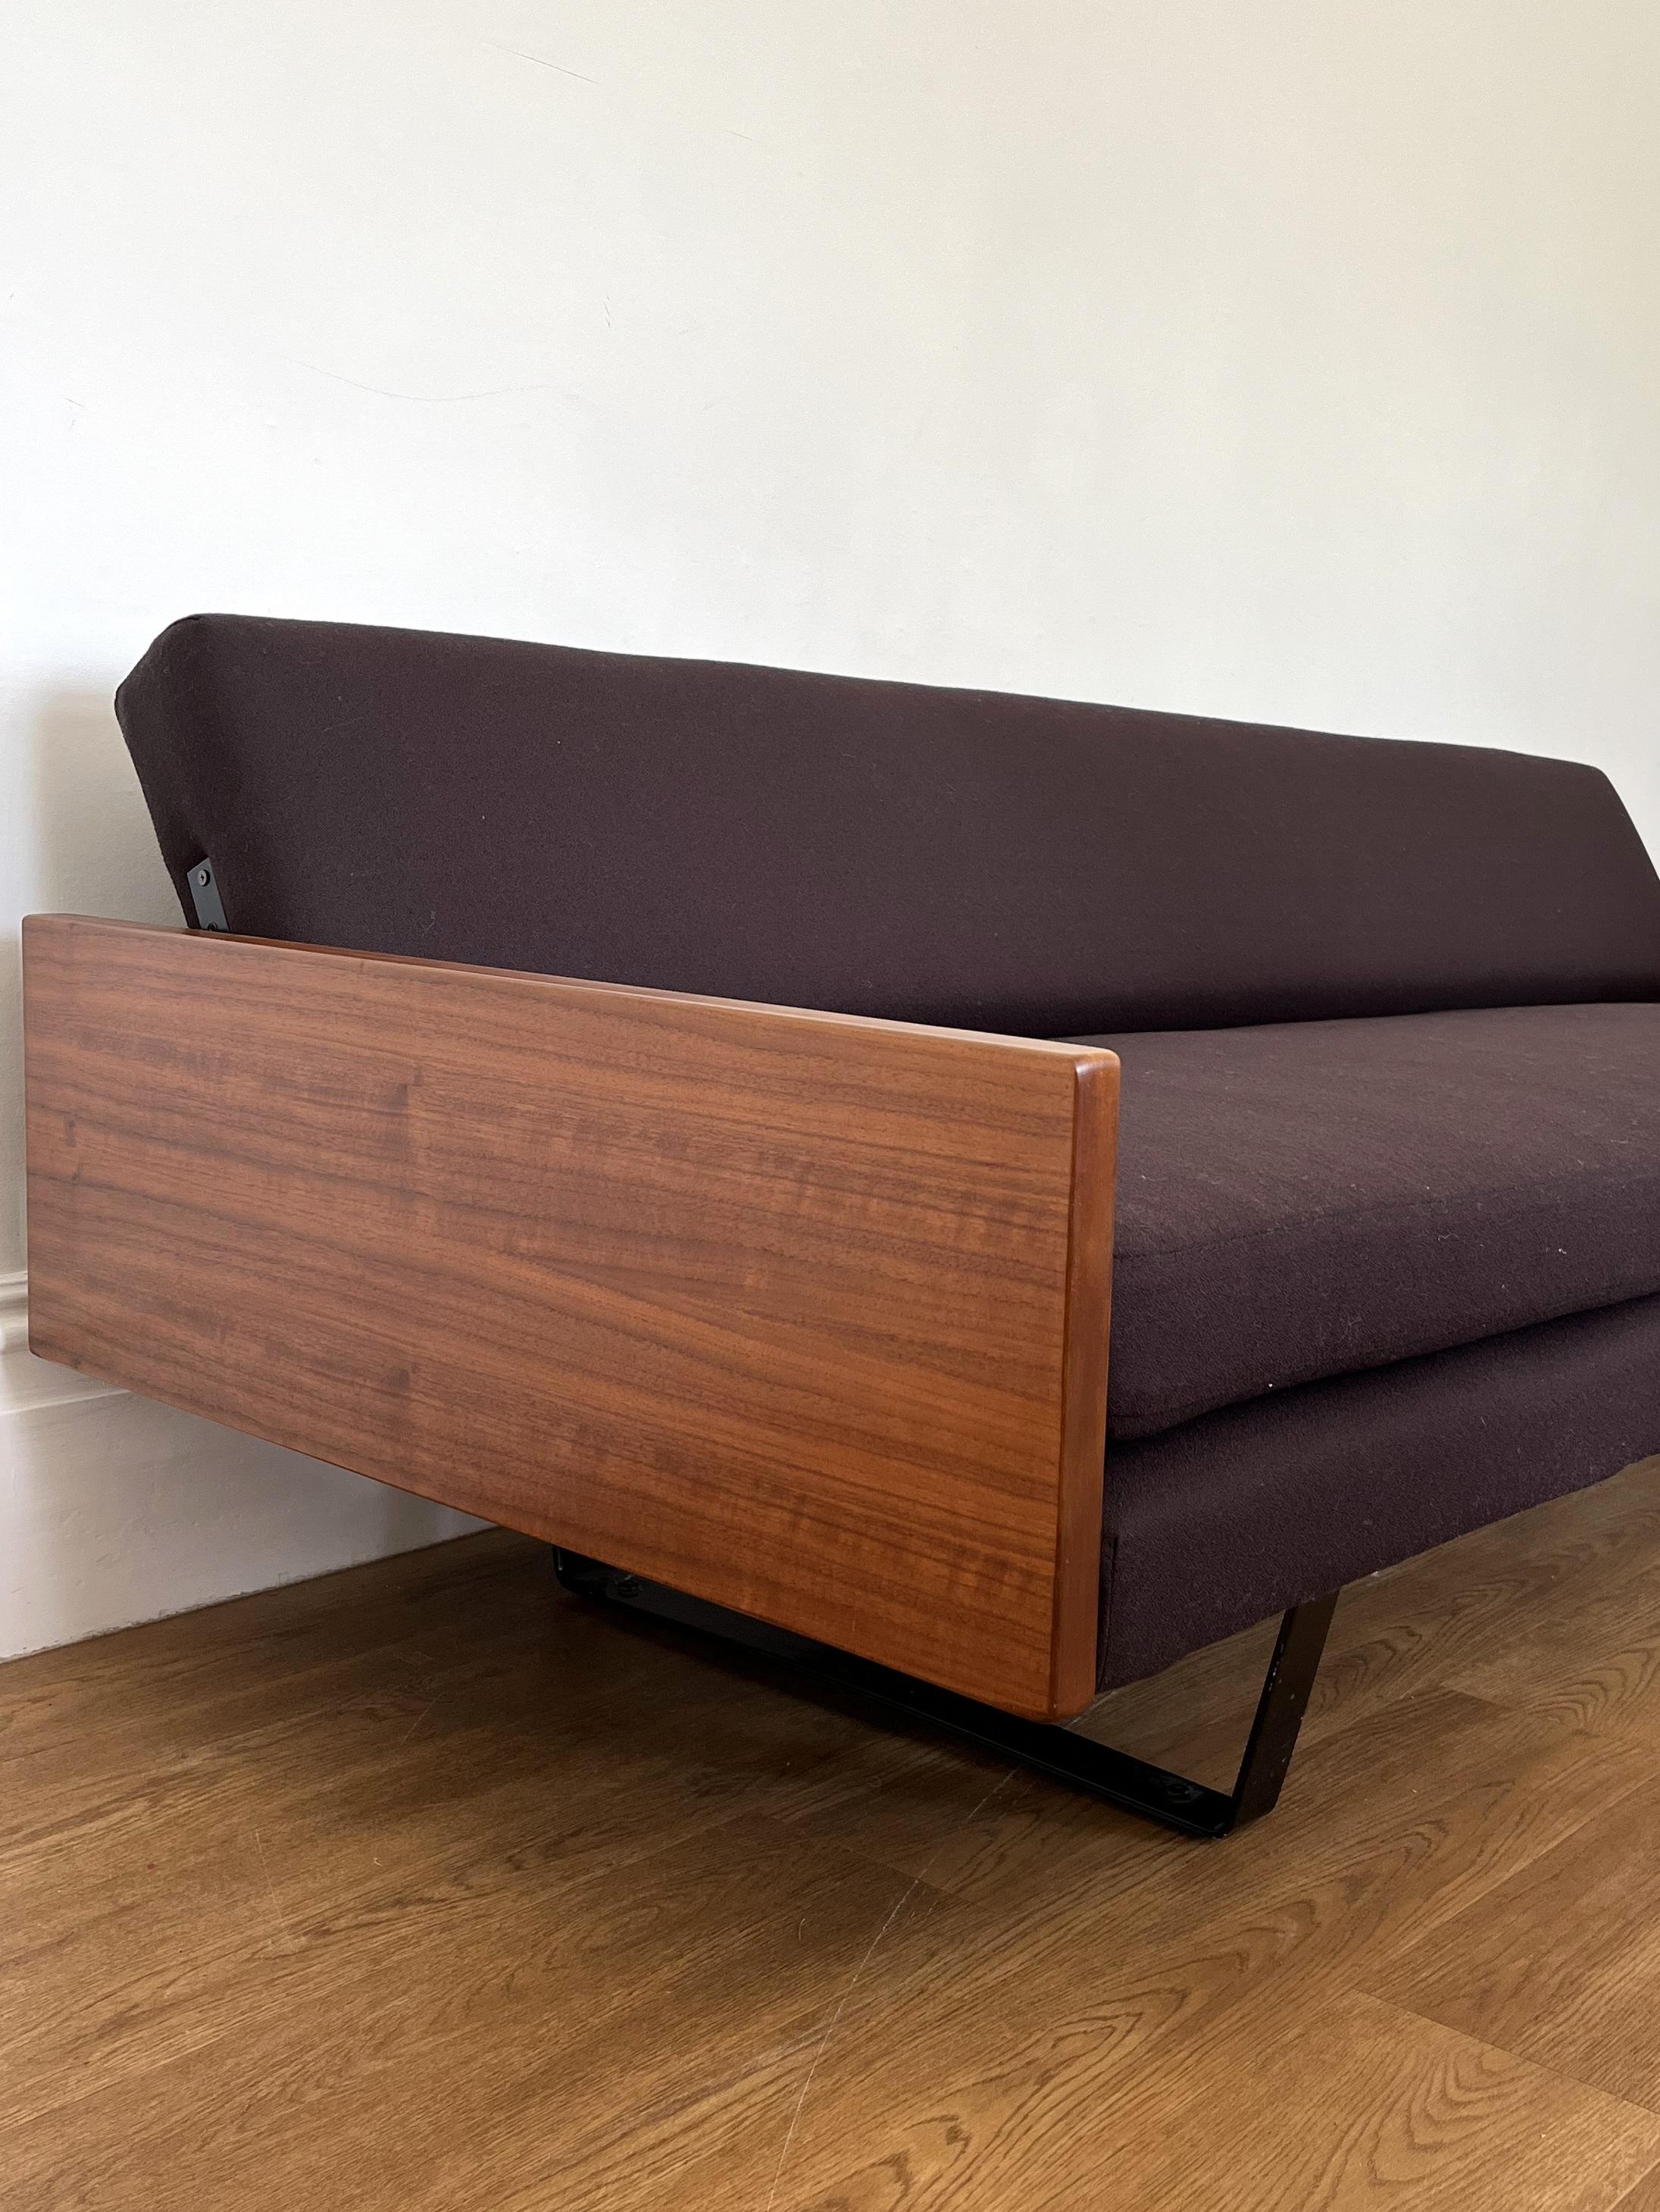 circa 1980s Habitat reissue of the 1957 Robin Day design.

The back is designed to flip over to create a single bed.

The daybed has been fully restored and presents superbly. It has new foam and webbing and has been reupholstered in Bute